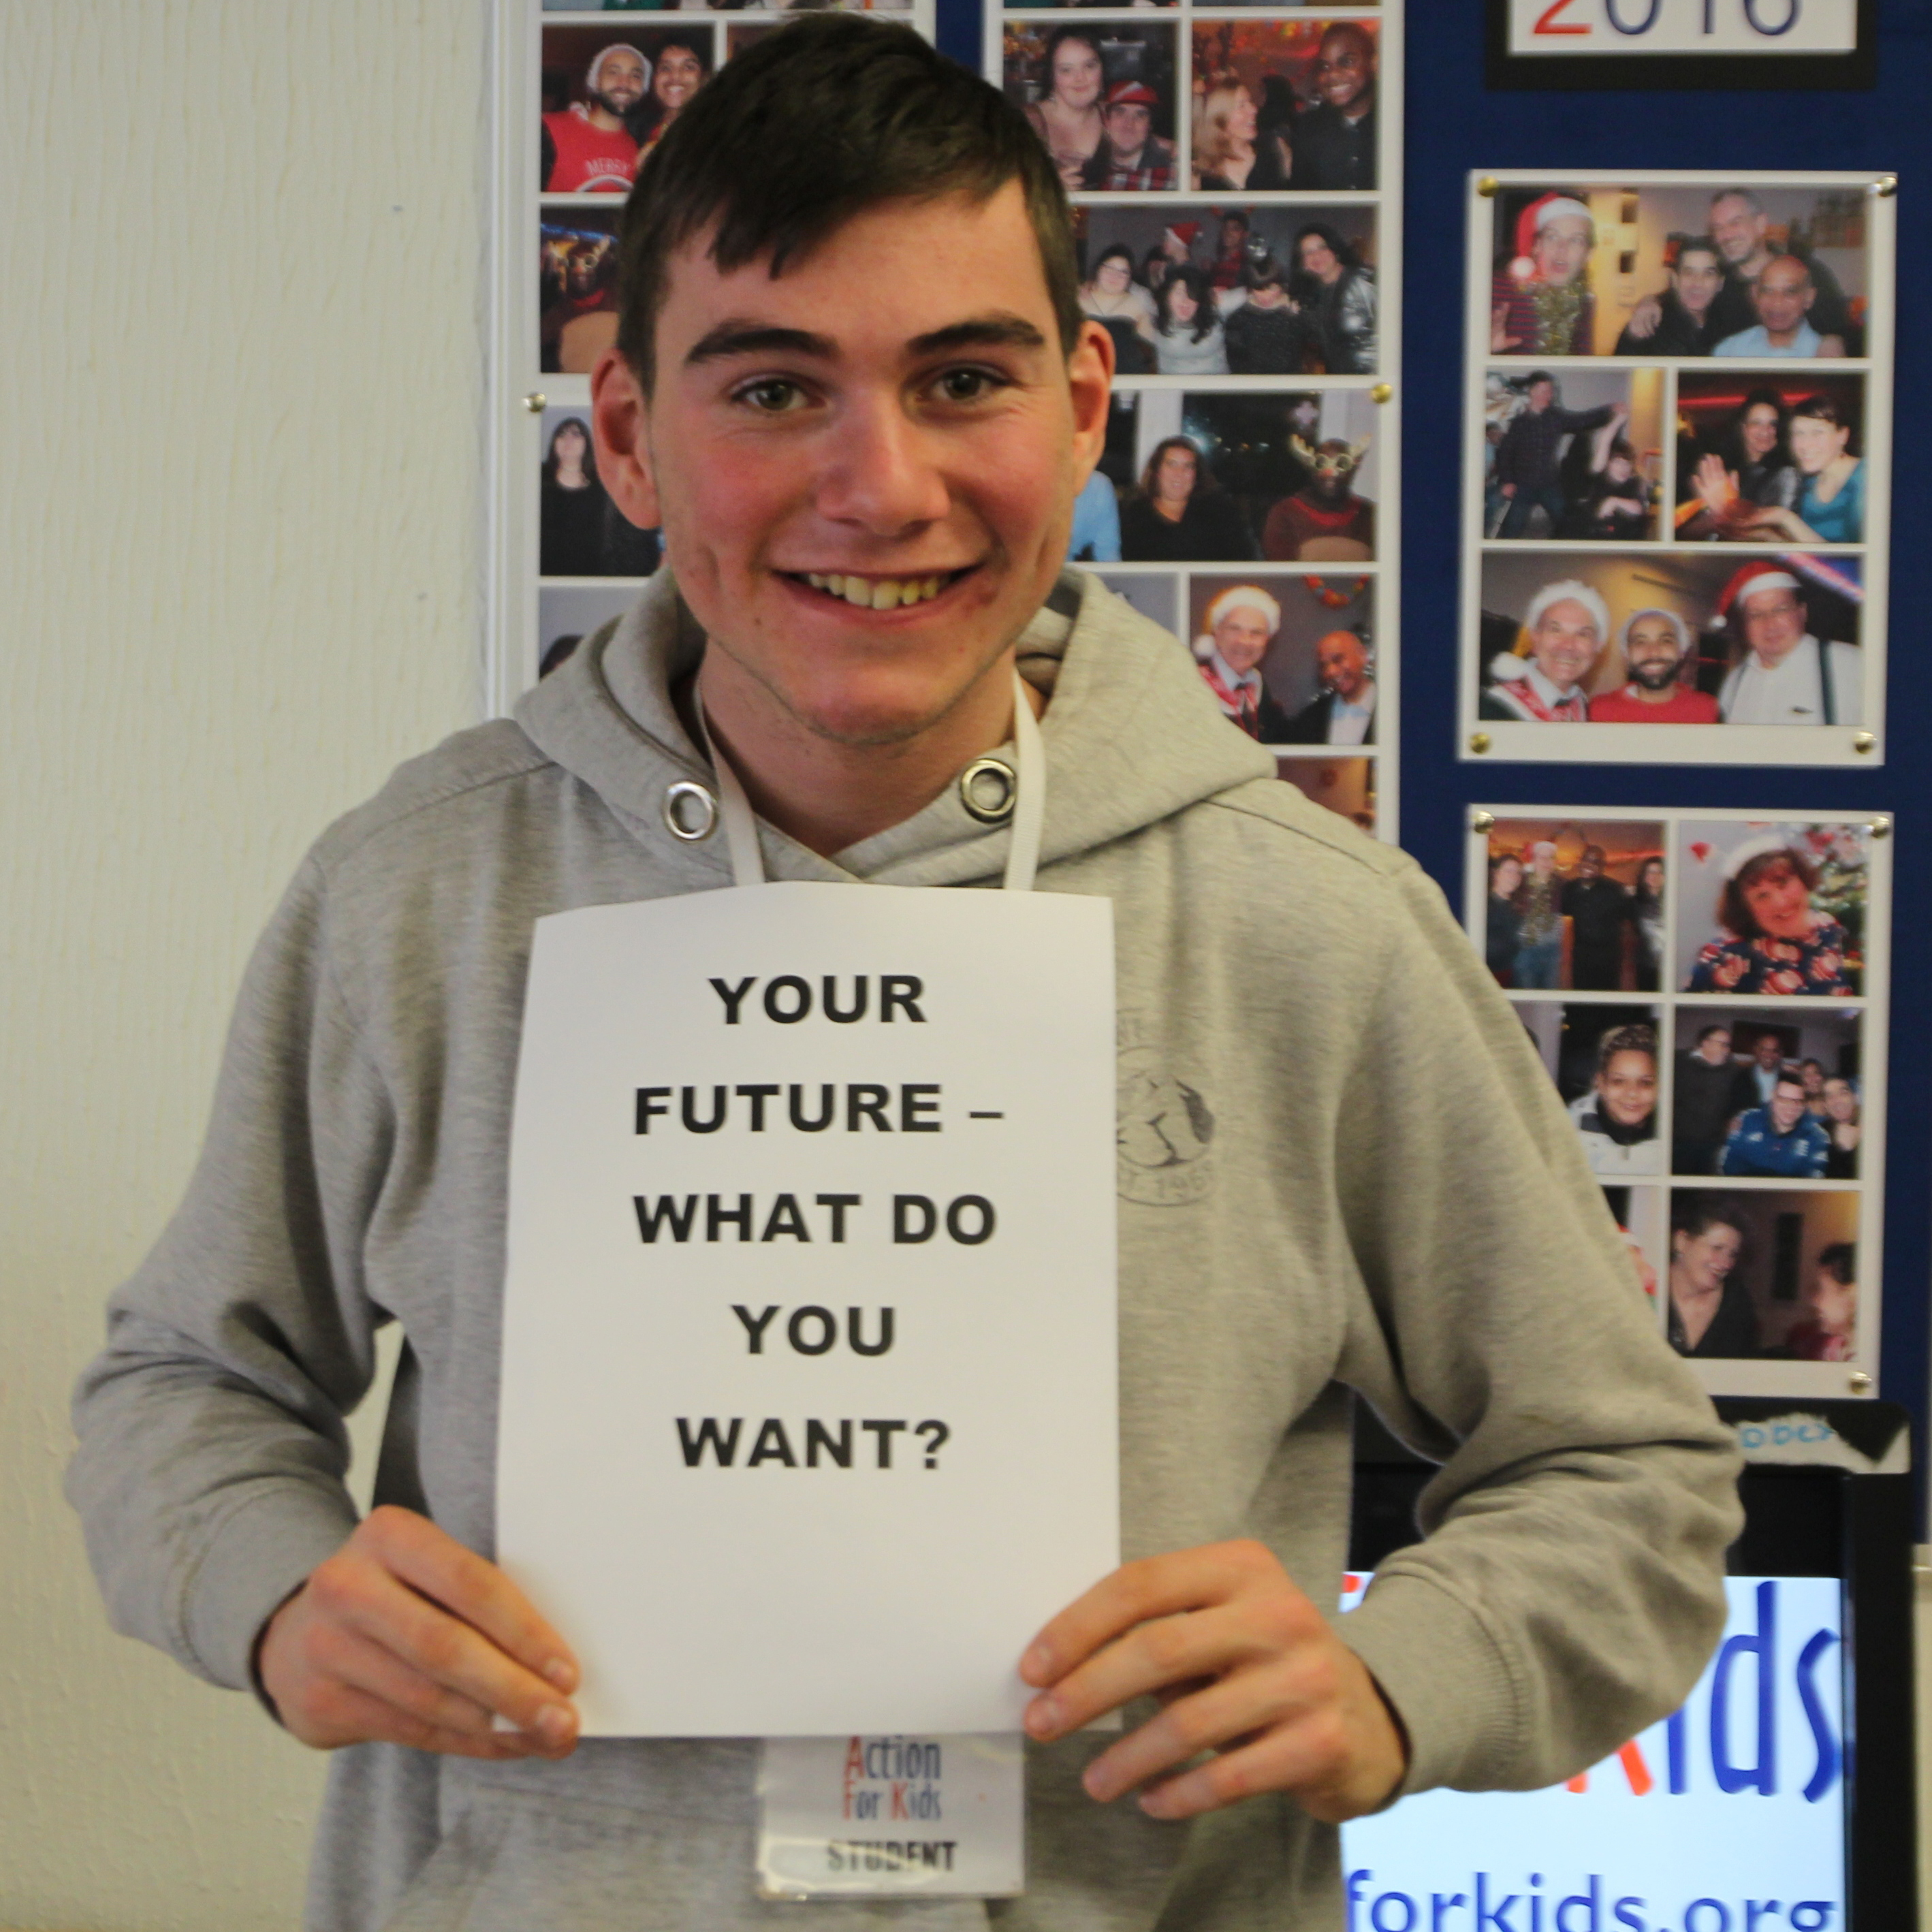 a person is smiling at camera holding a sign that says "Your future, what do you want?"